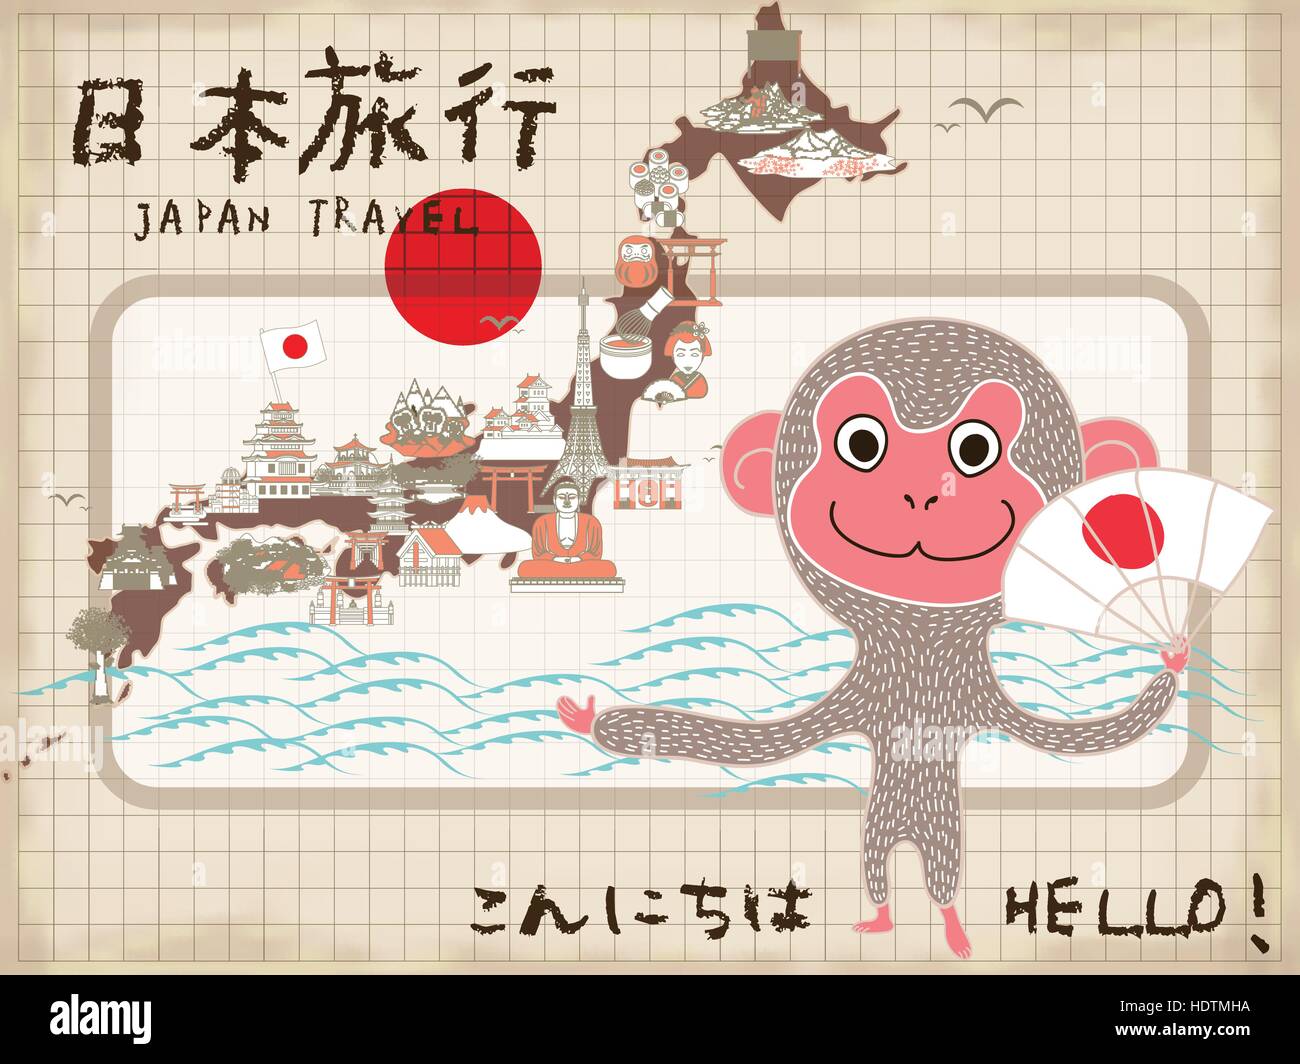 adorable Japan travel poster with cartoon monkey - Japan travel and Hello in Japanese words Stock Vector